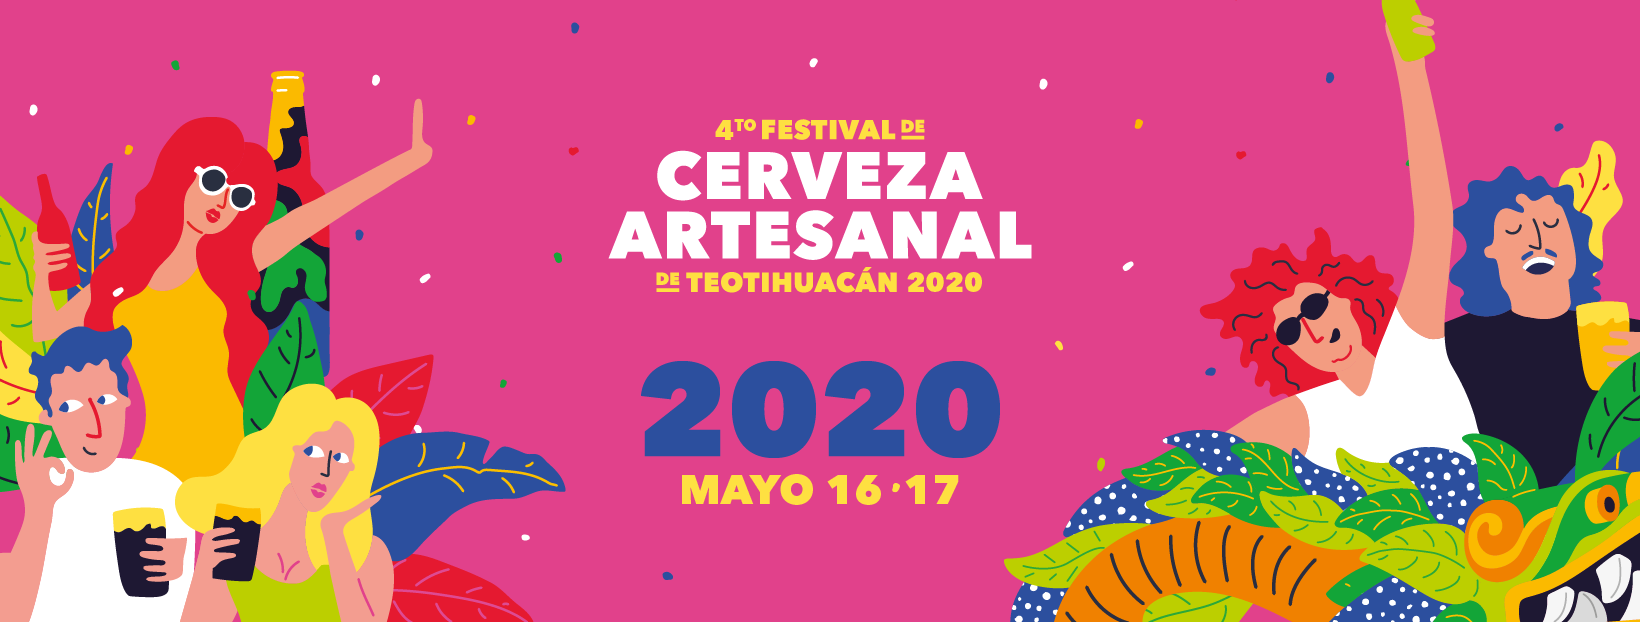 Festival Teotihuacan 2020